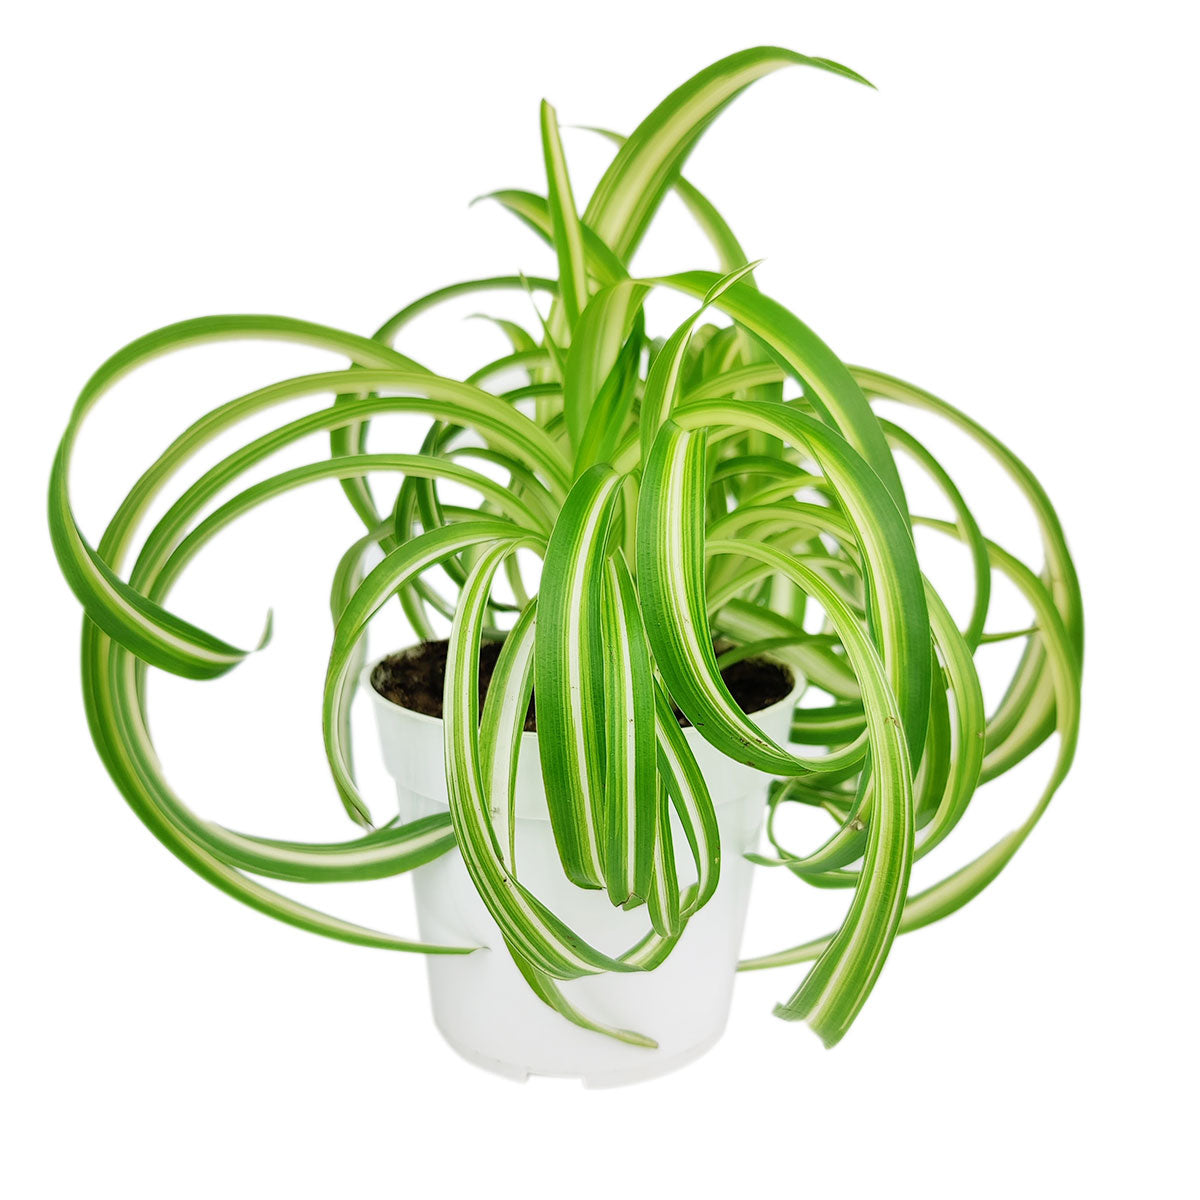 How to Care for a Spider Plant